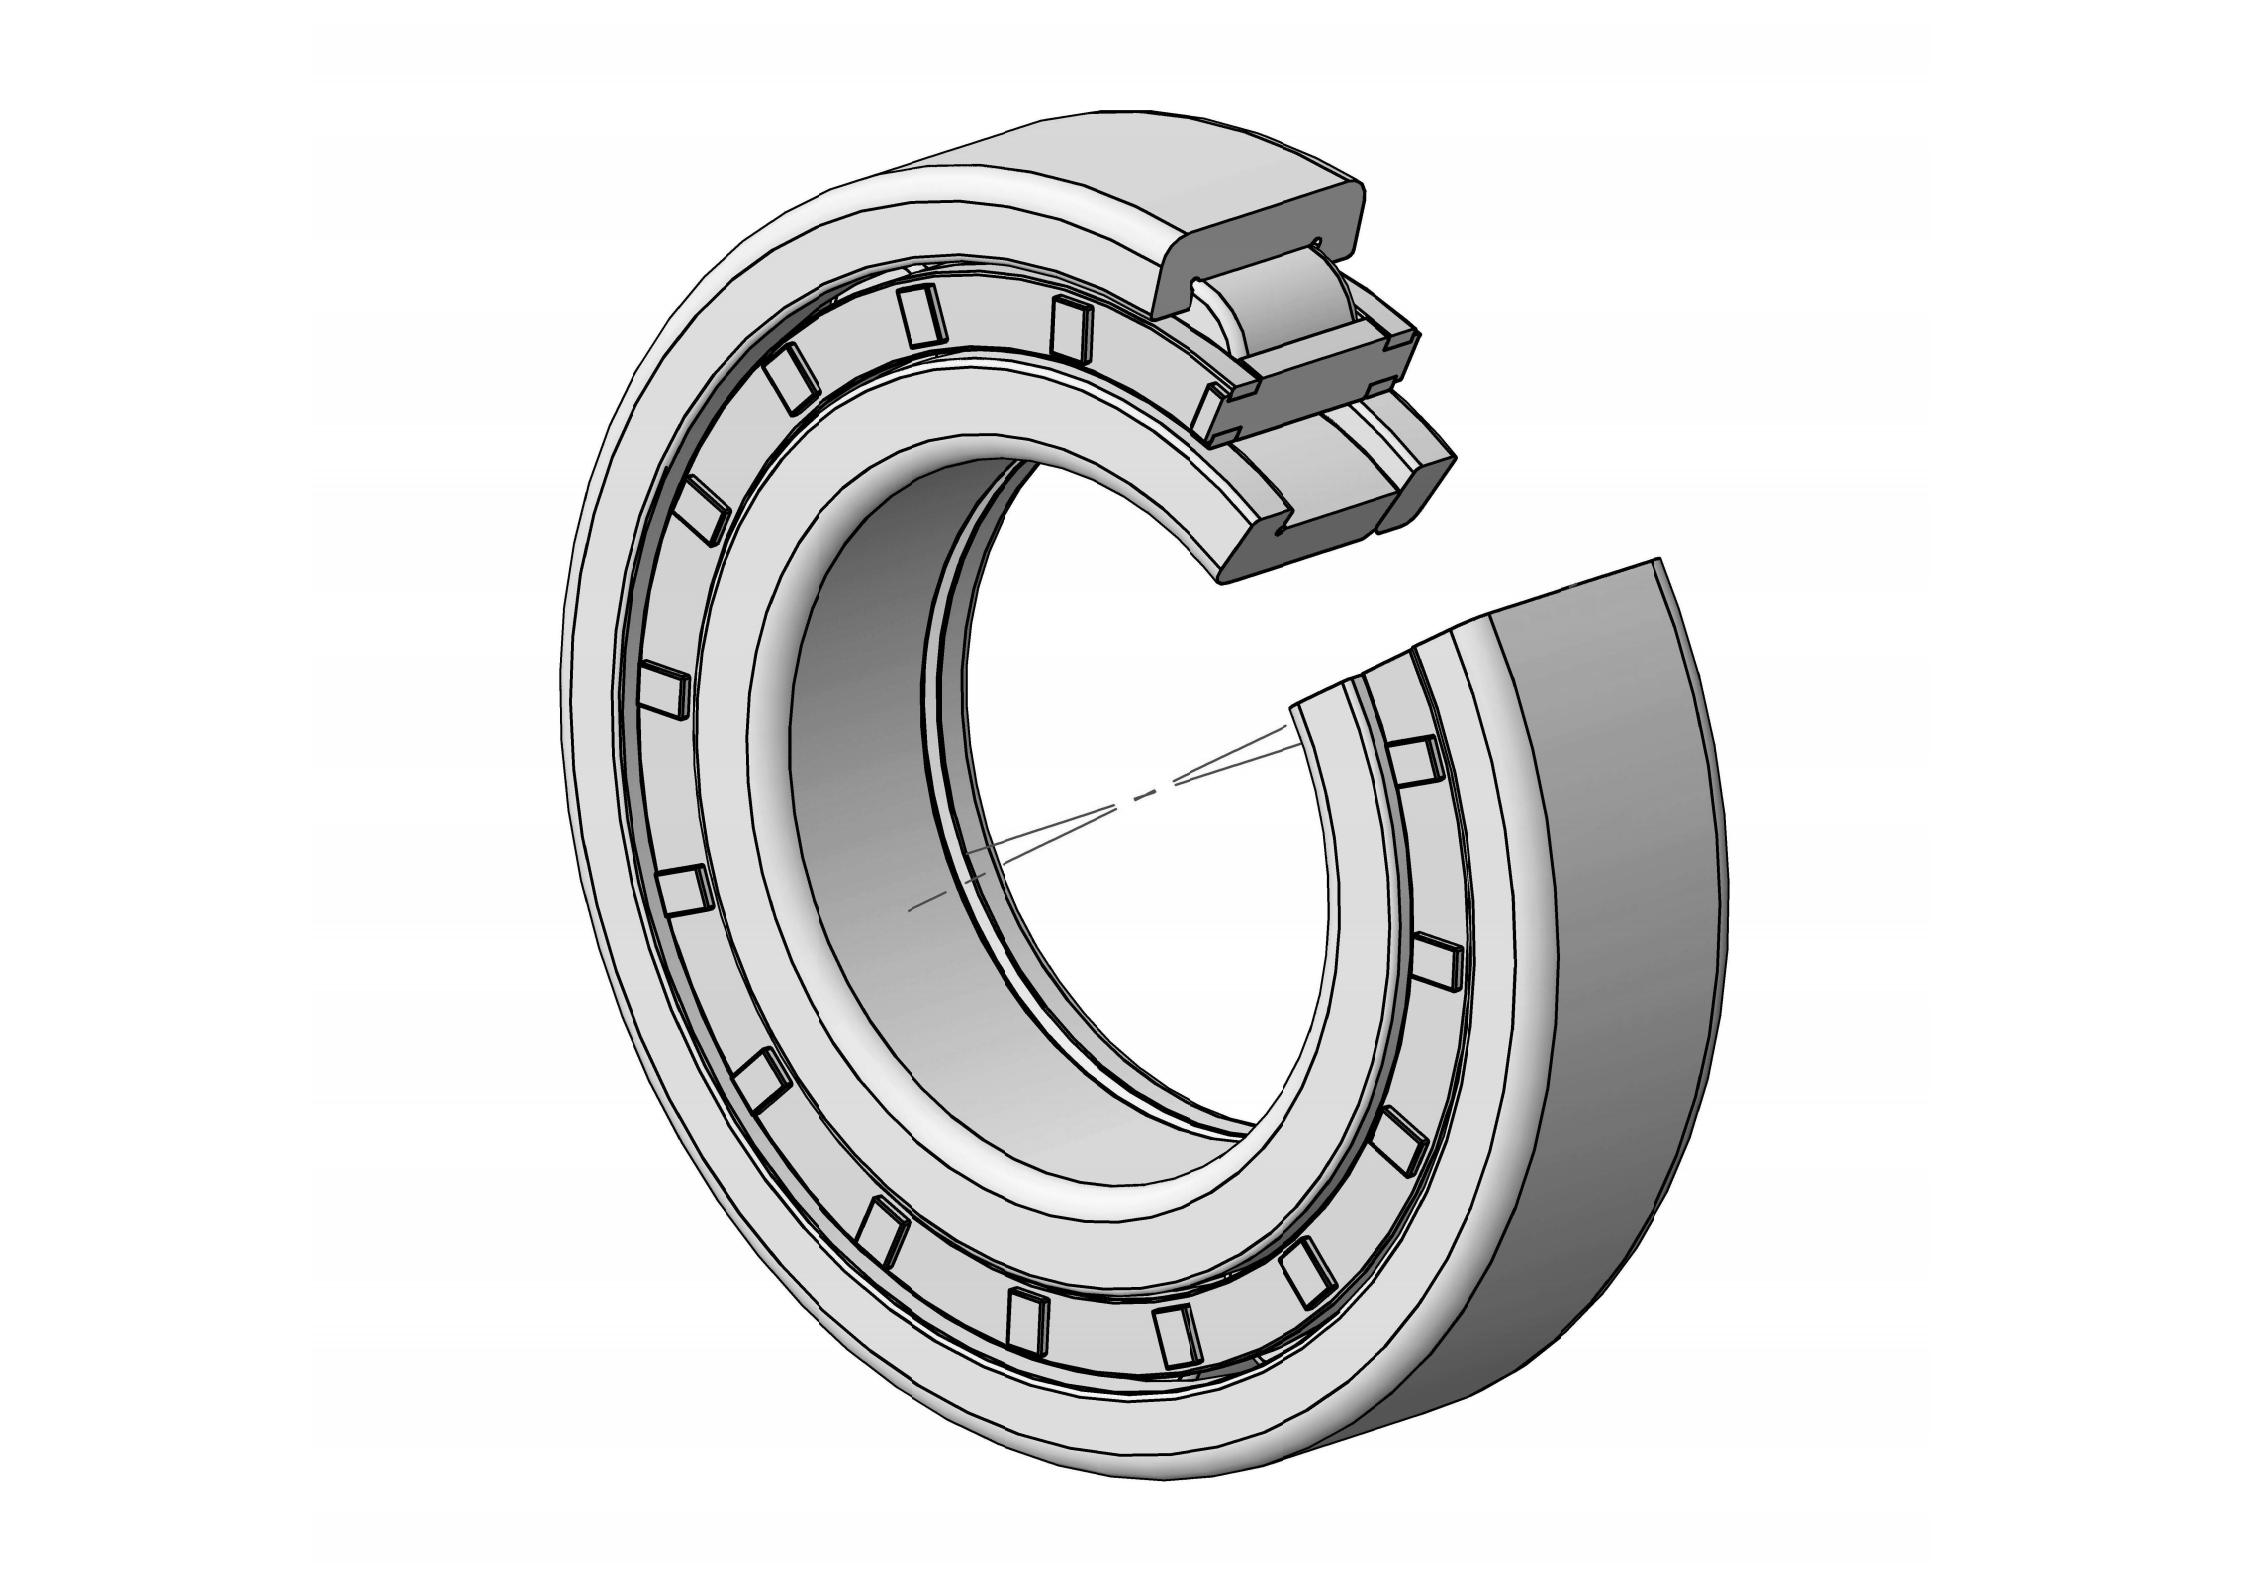 NUP313-E Single Row Cylindrical roller bearing 